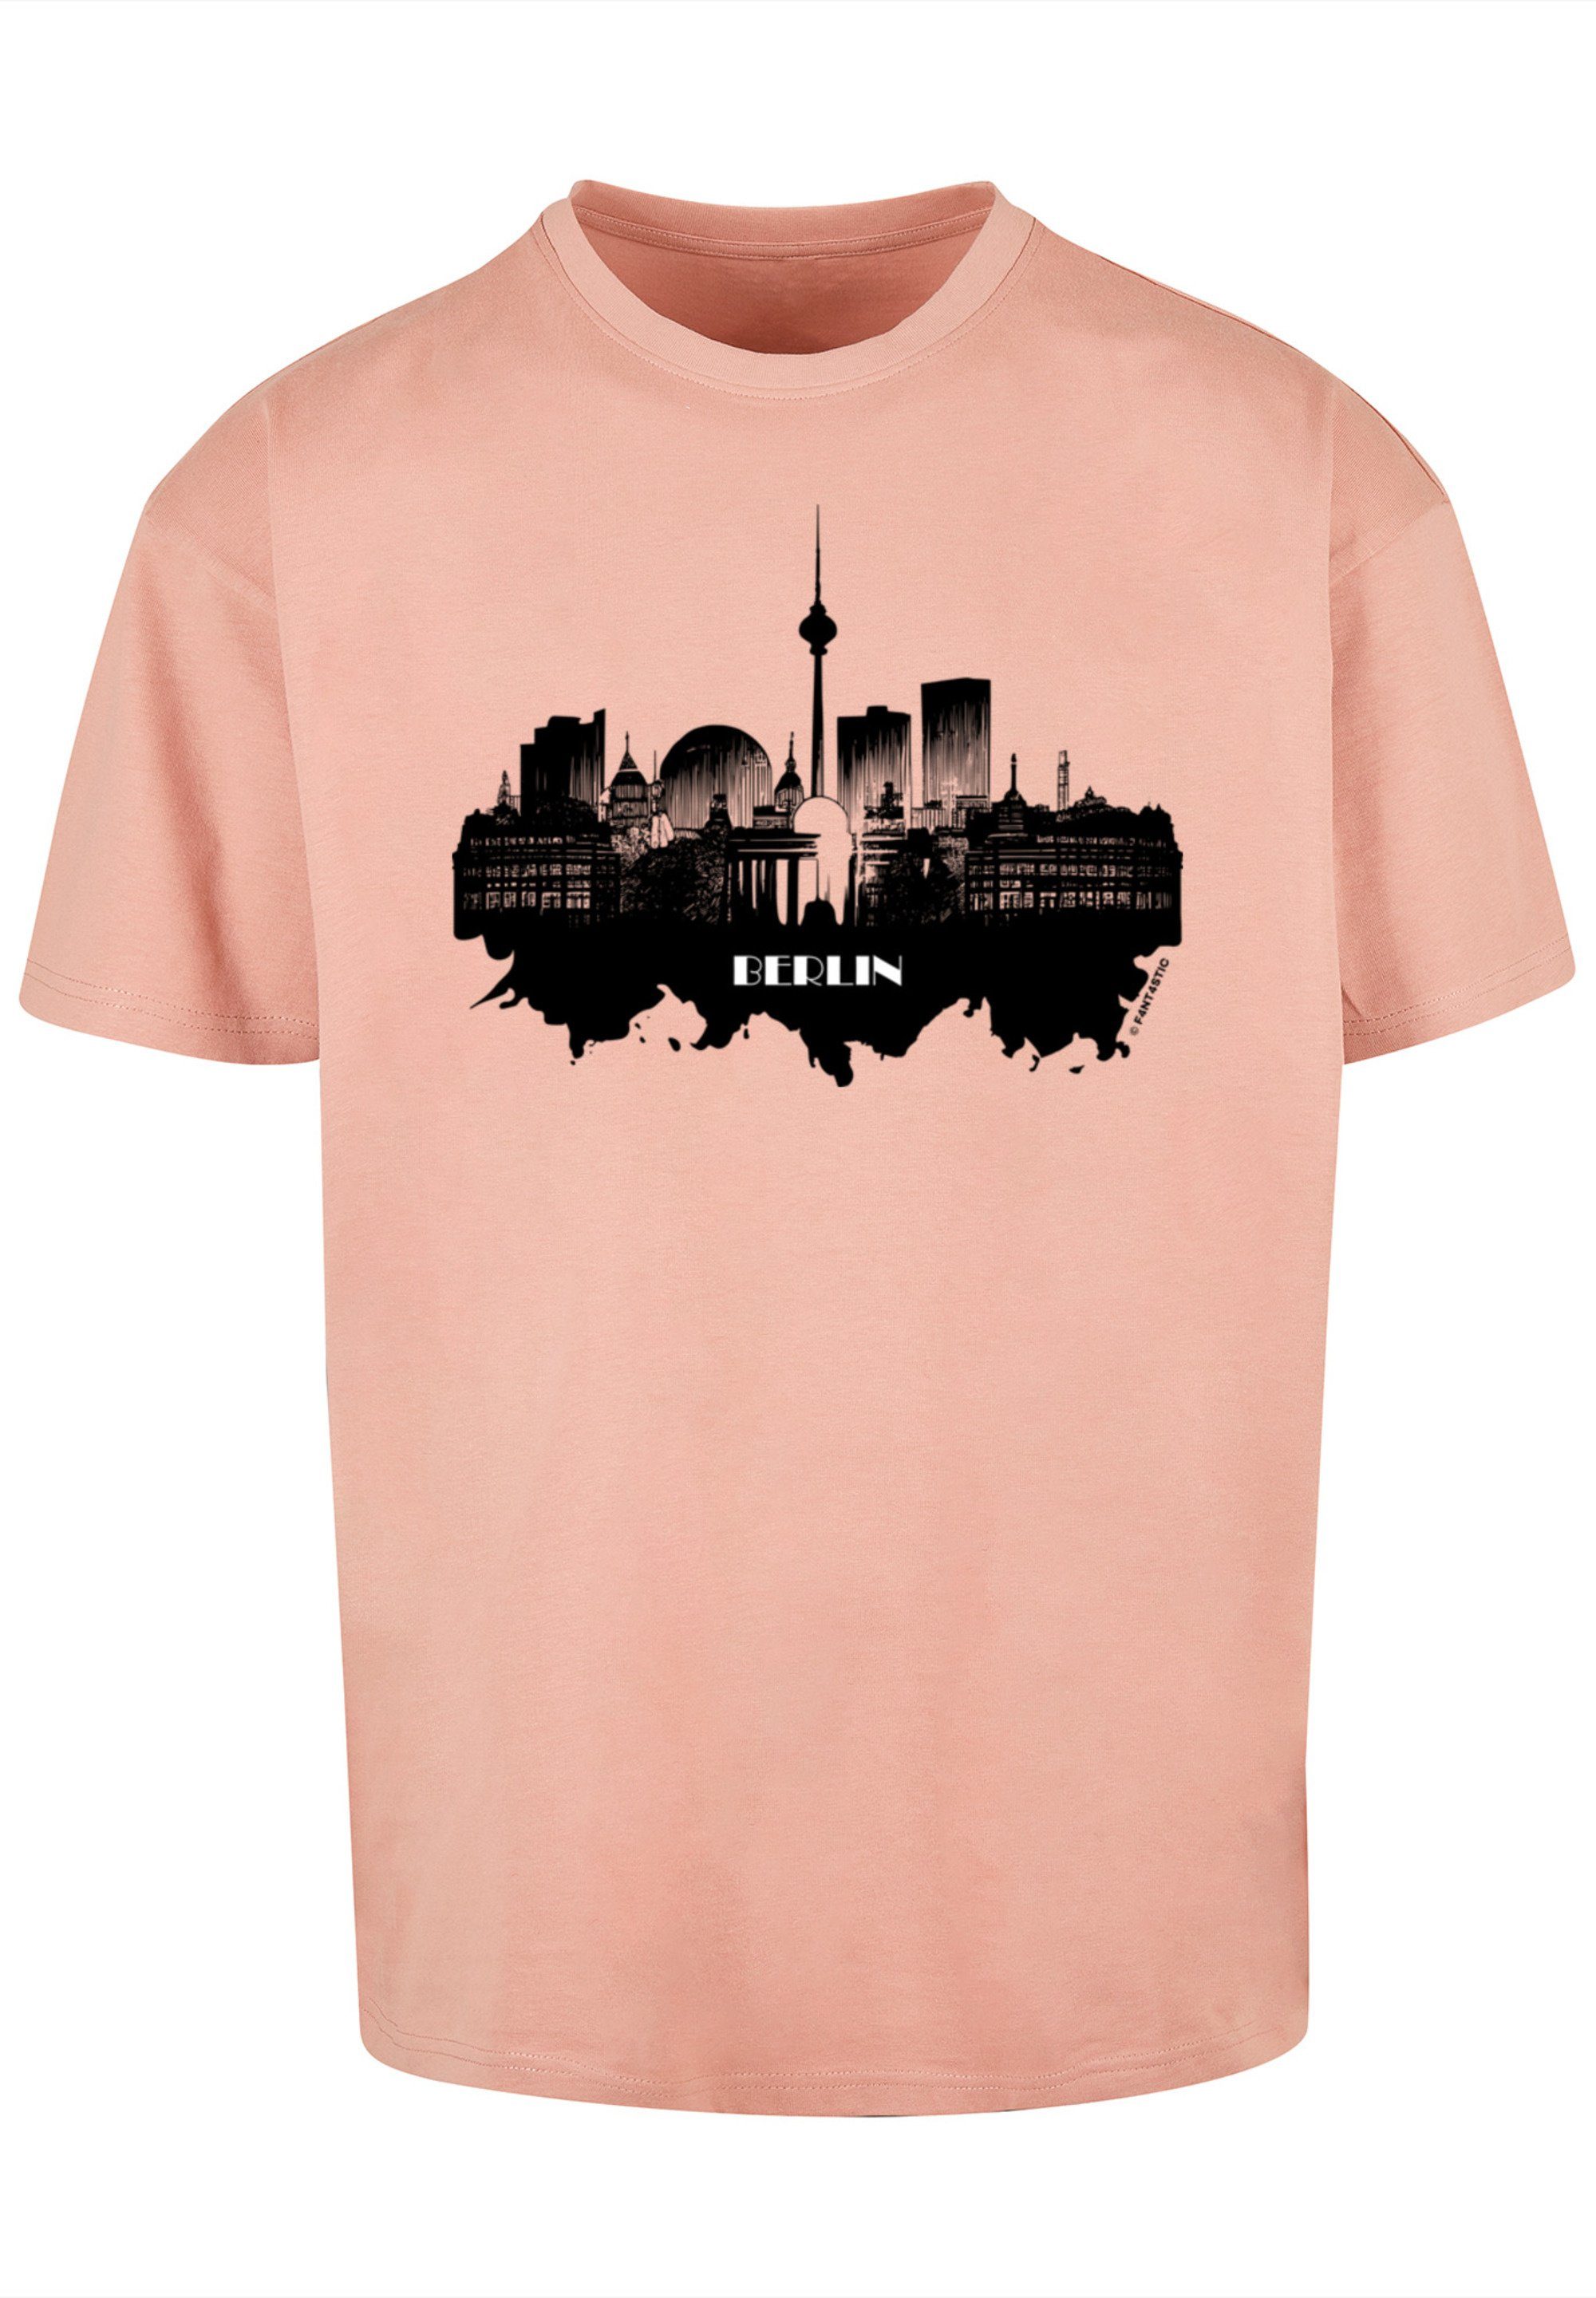 F4NT4STIC T-Shirt Cities Collection - amber Berlin skyline Print